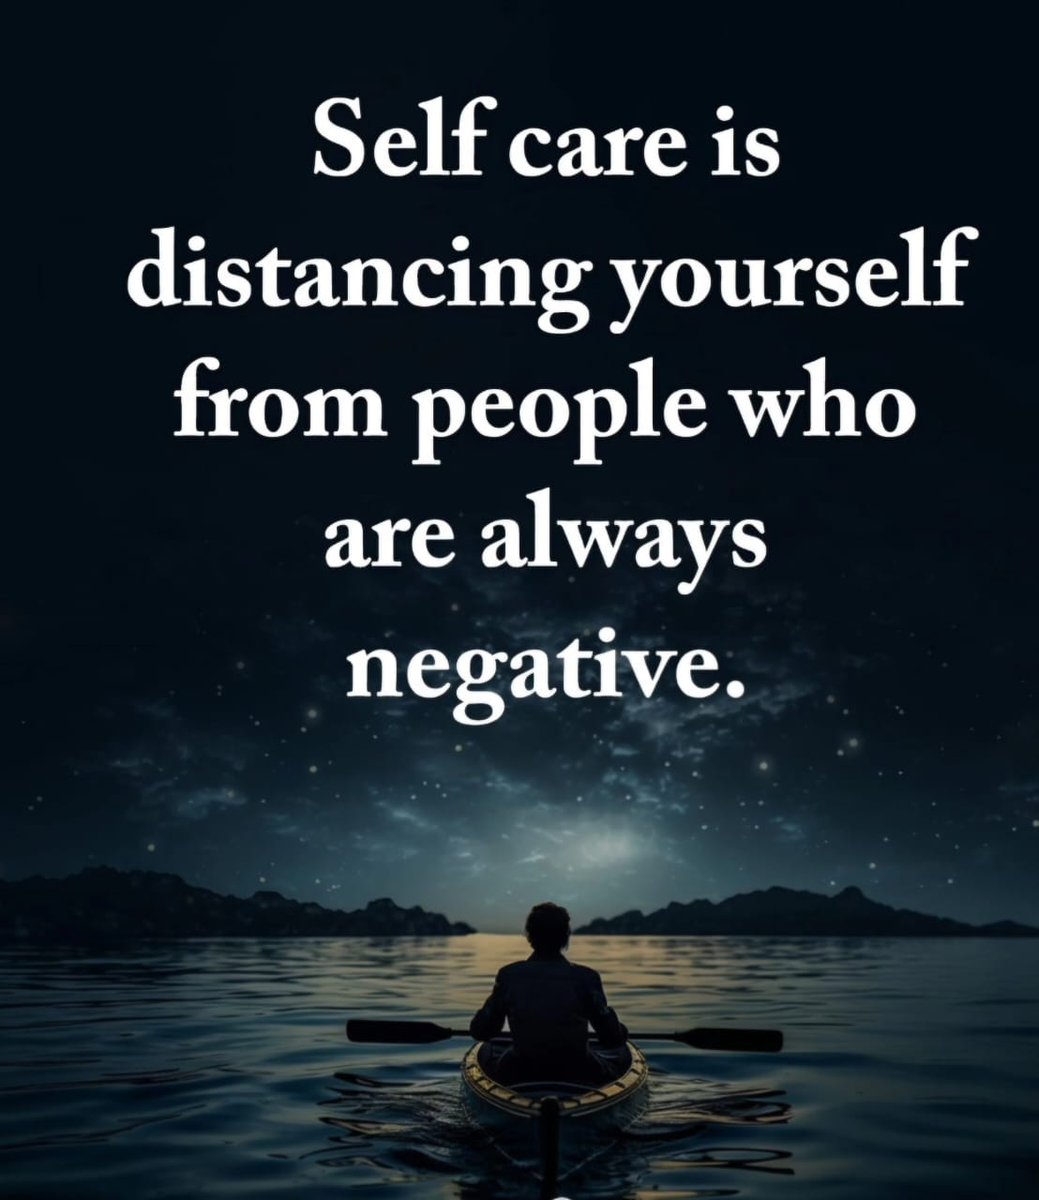 Self-care is about creating healthy boundaries and a positive environment for yourself. Distancing yourself from negative influences and toxic people is a form of #SelfPreservation and #EmotionalWellbeing. Surround yourself with uplifting relationships that nourish your spirit.